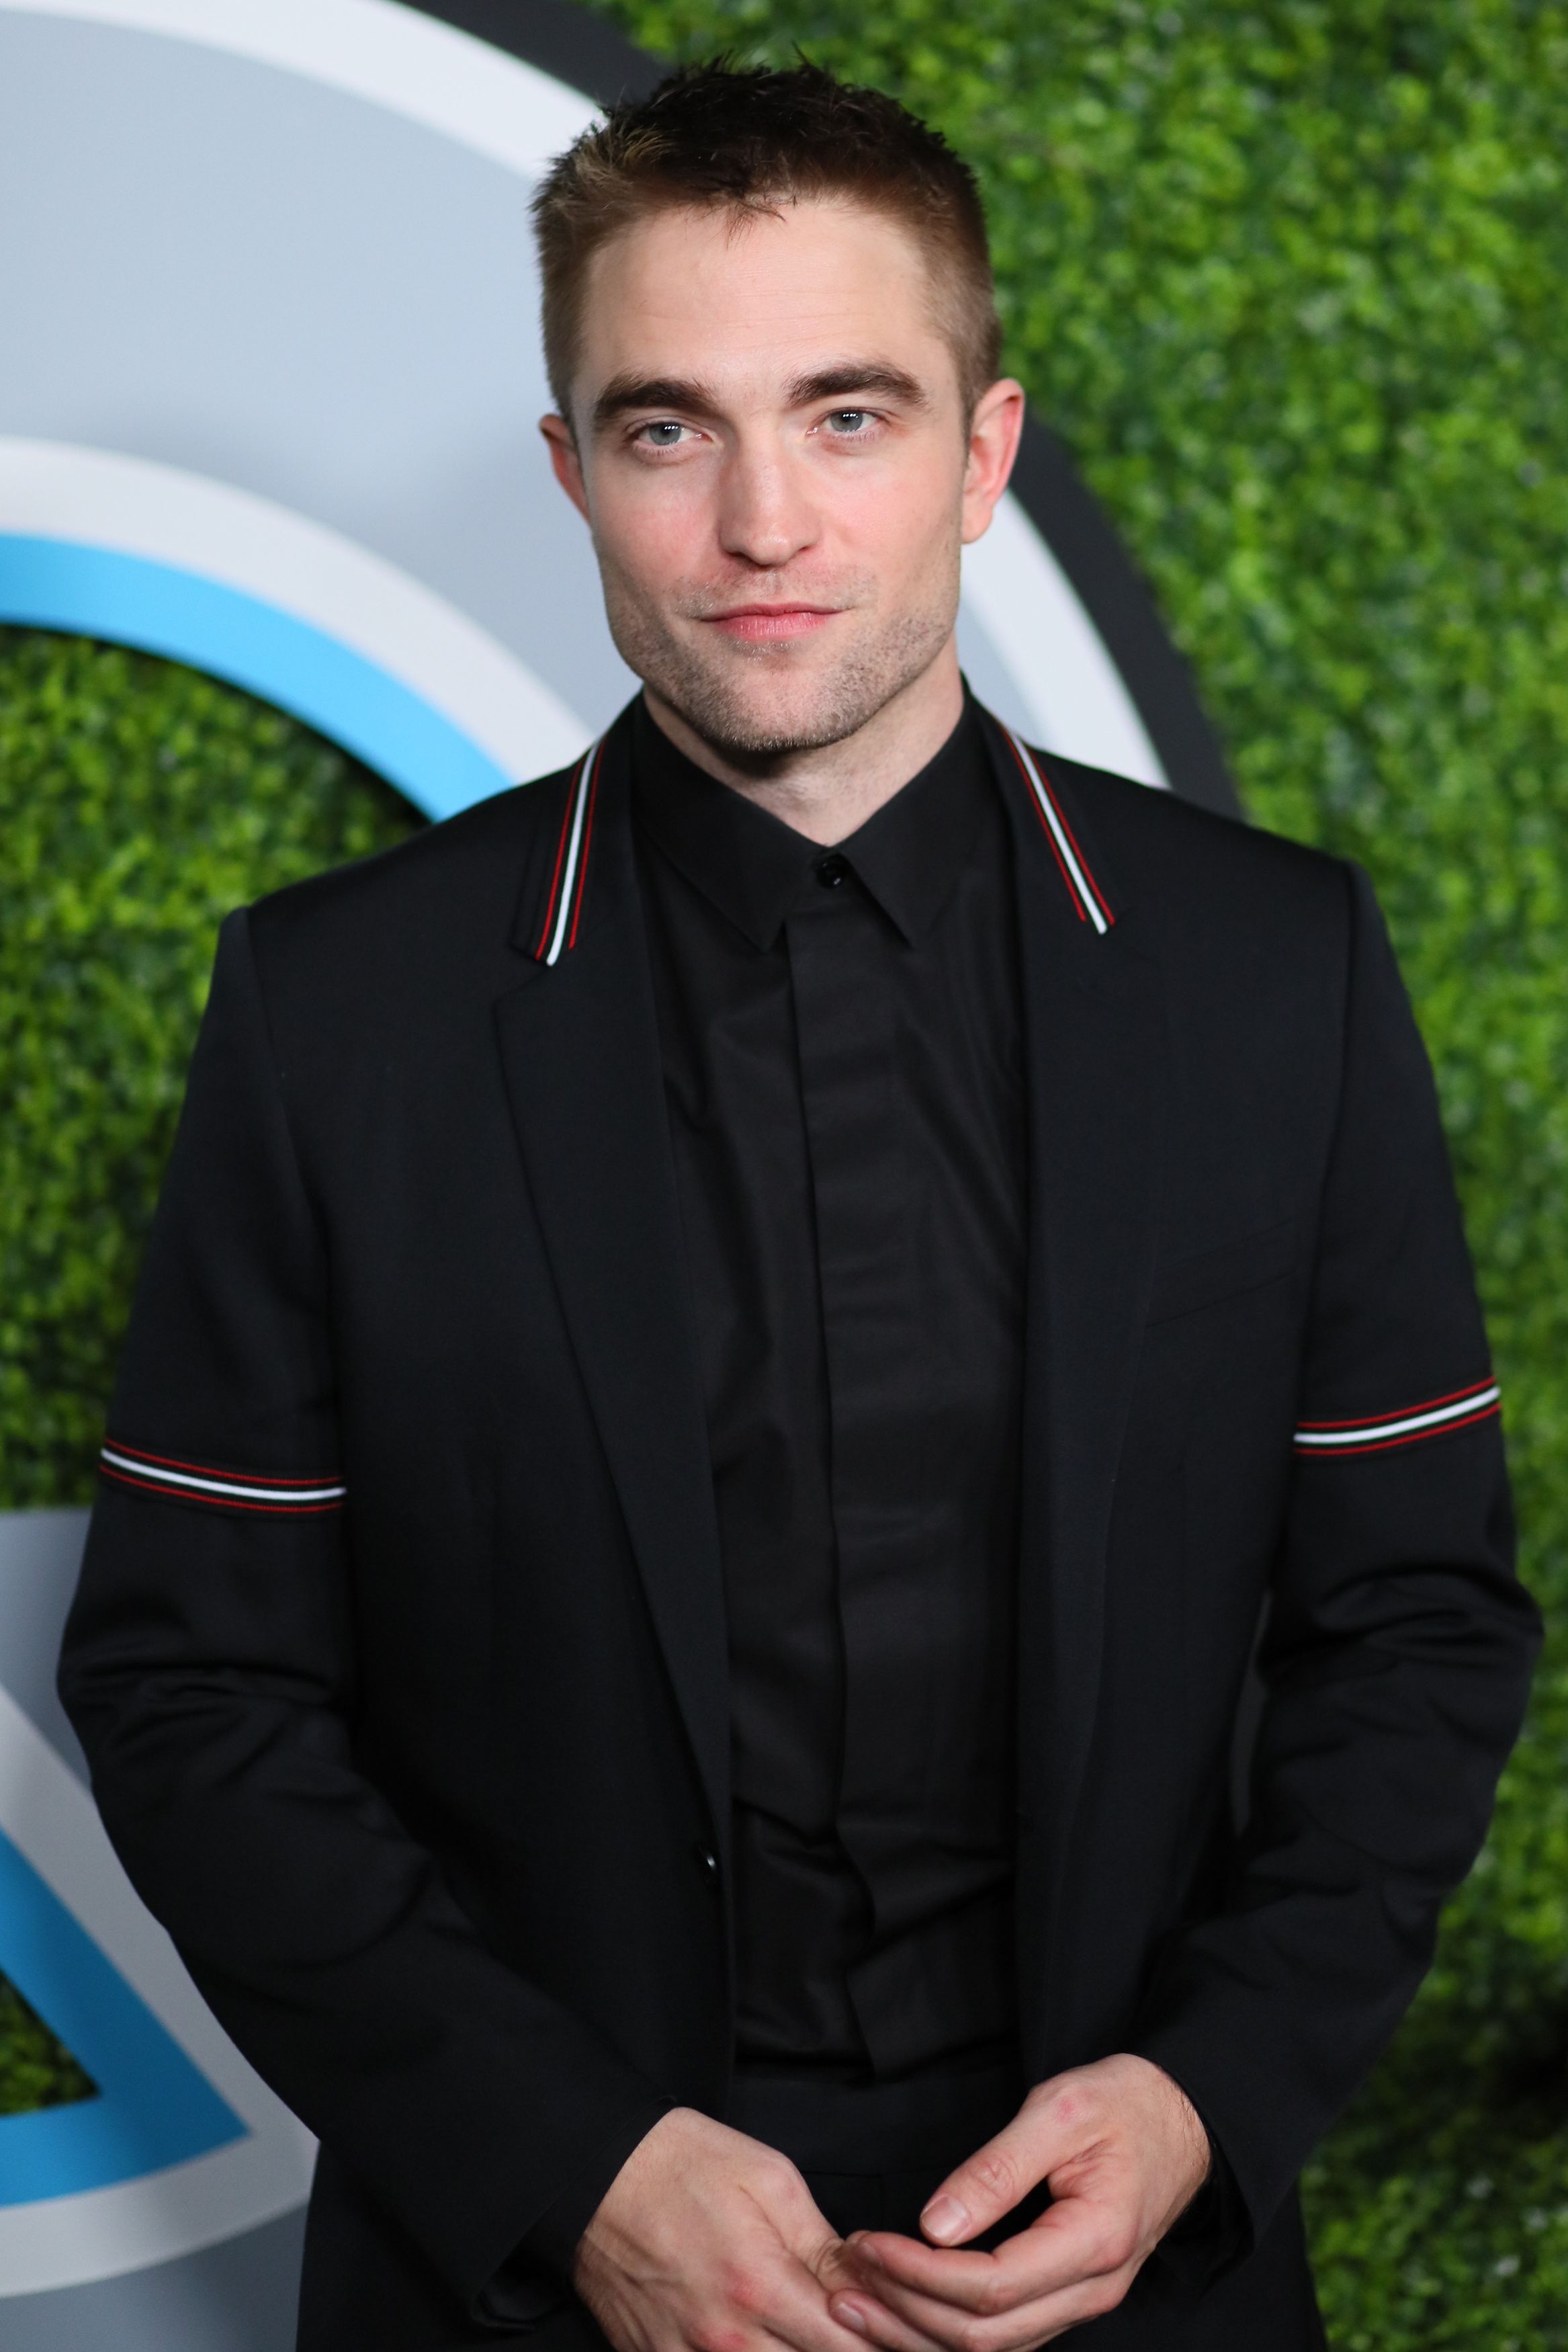 Robert Pattinson's Hair Is Glorious—8 Tips to Get His Hairstyle